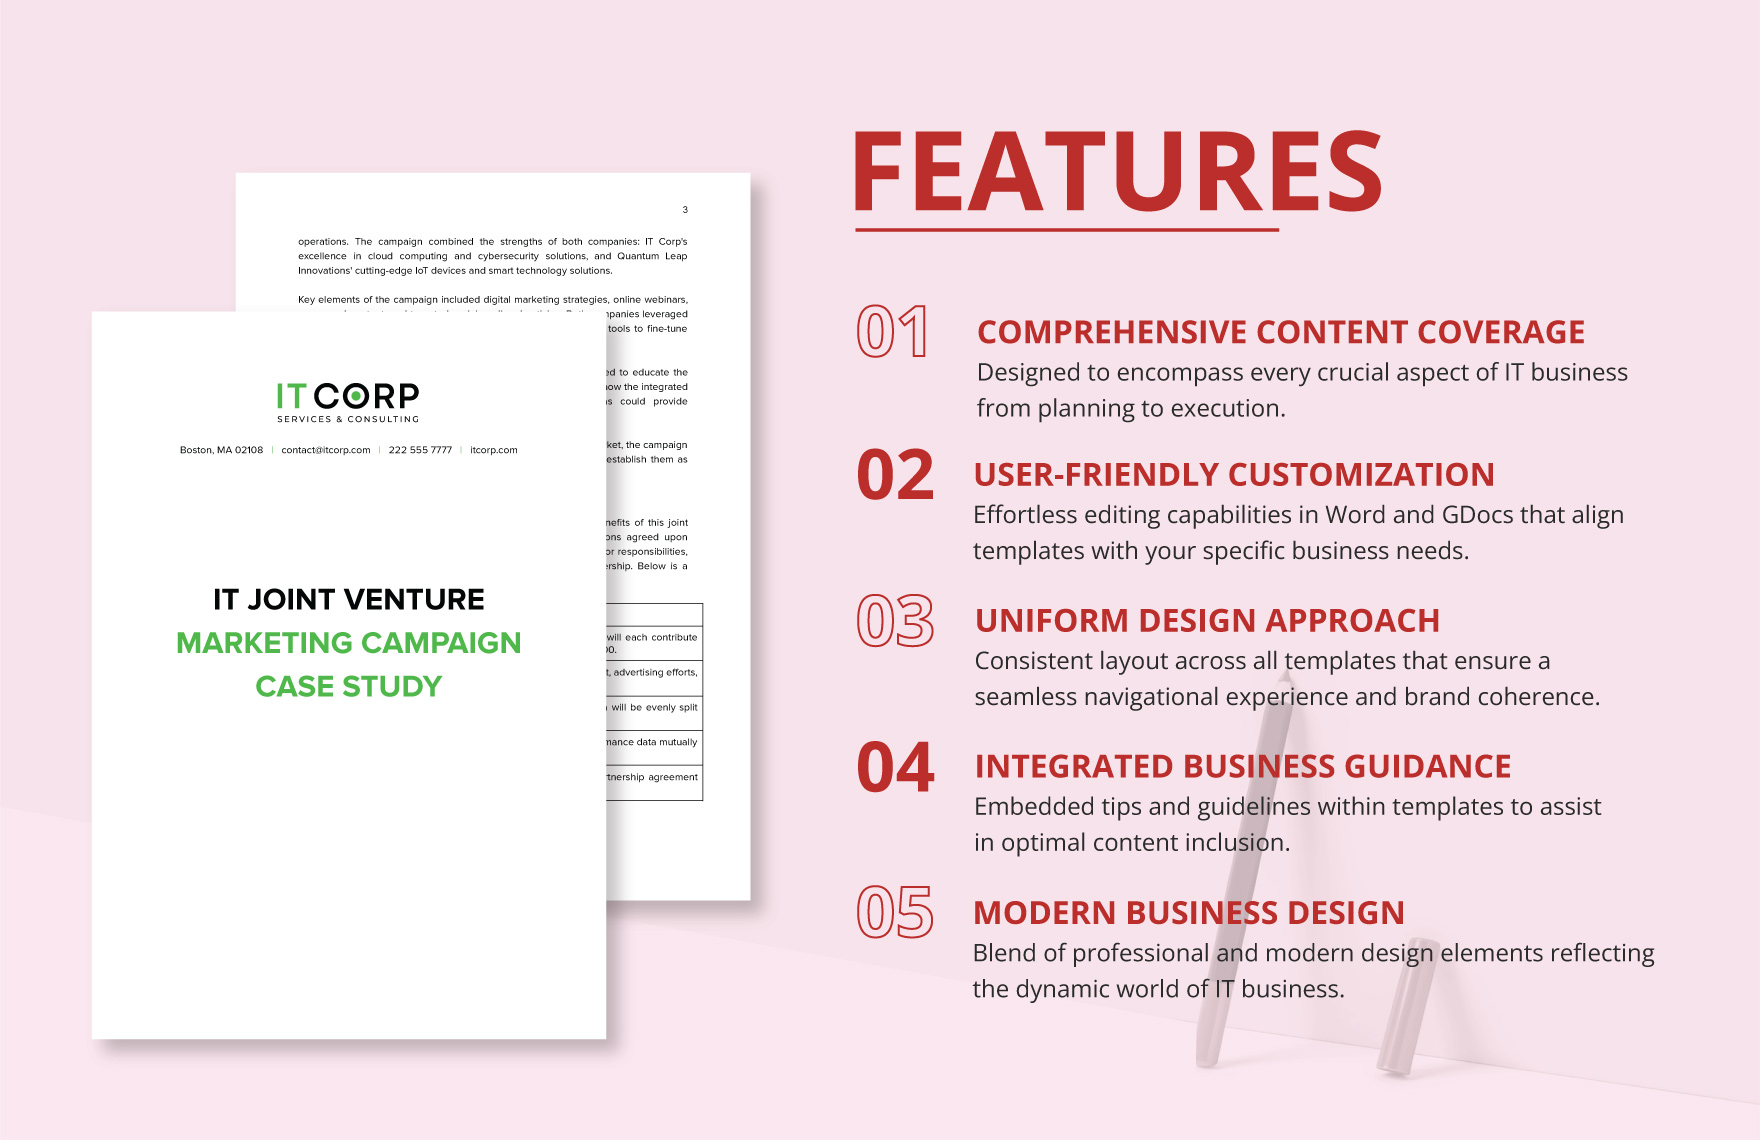 IT Joint Venture Marketing Campaign Case Study Template